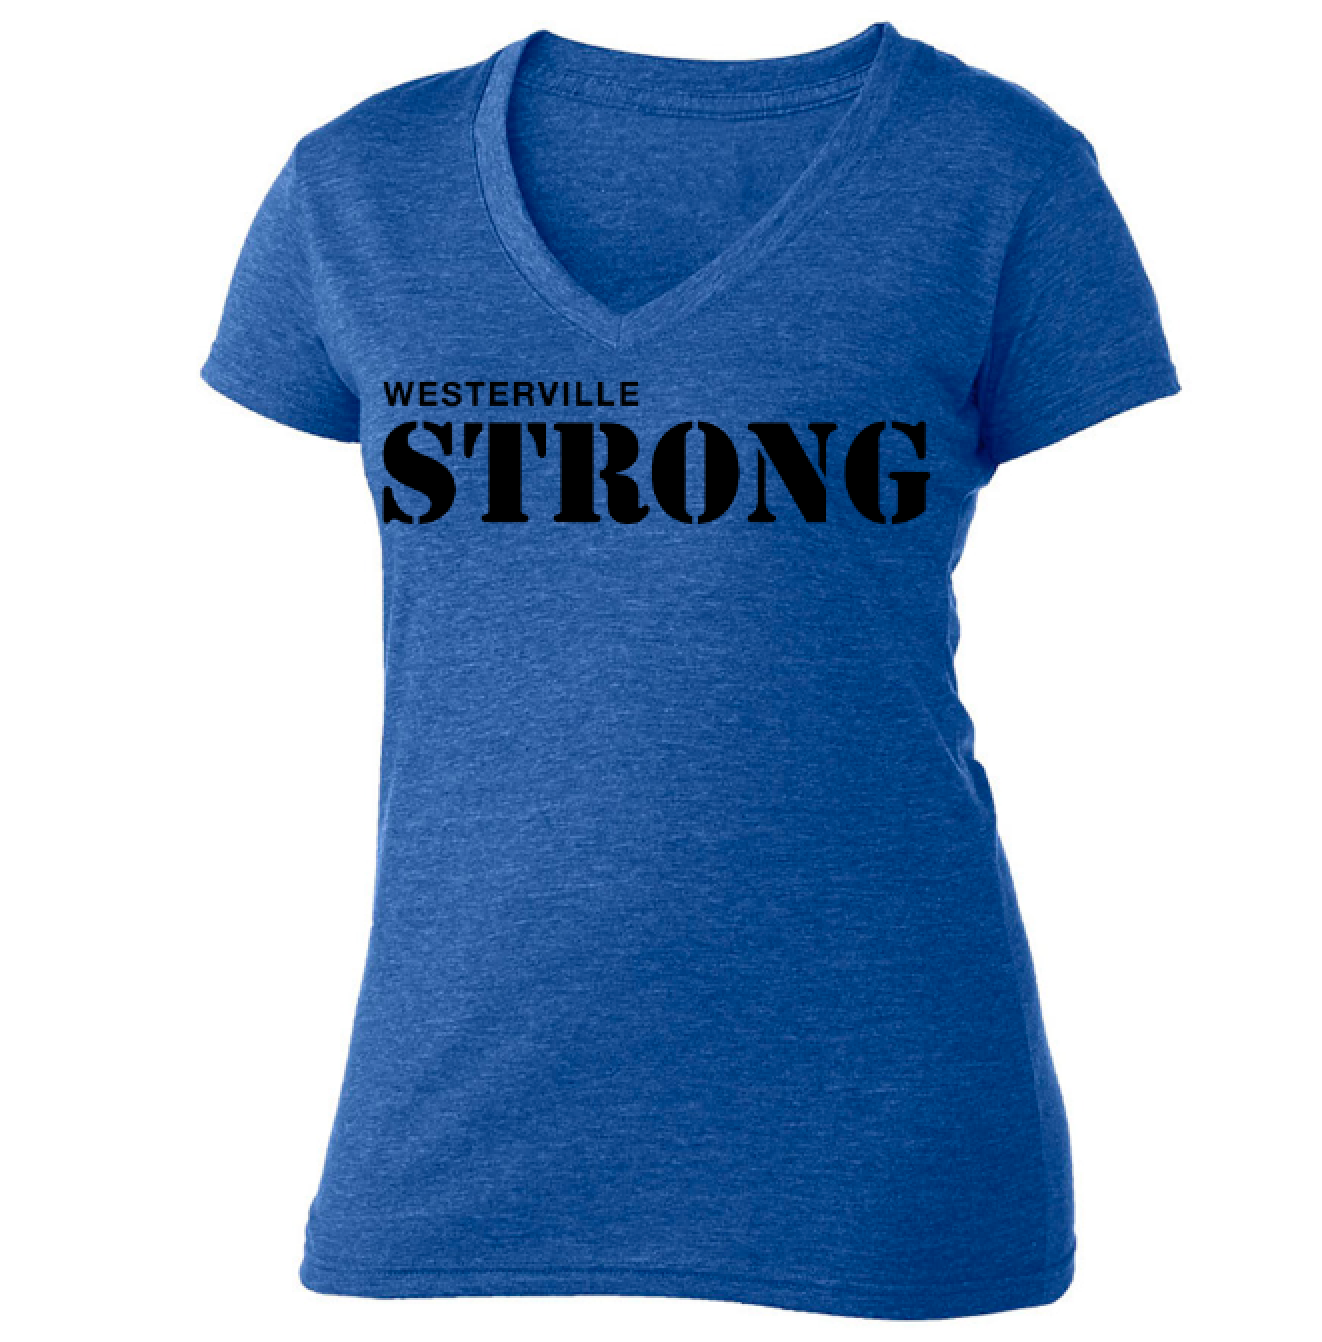 Westerville Strong : Women's Tee or V-neck